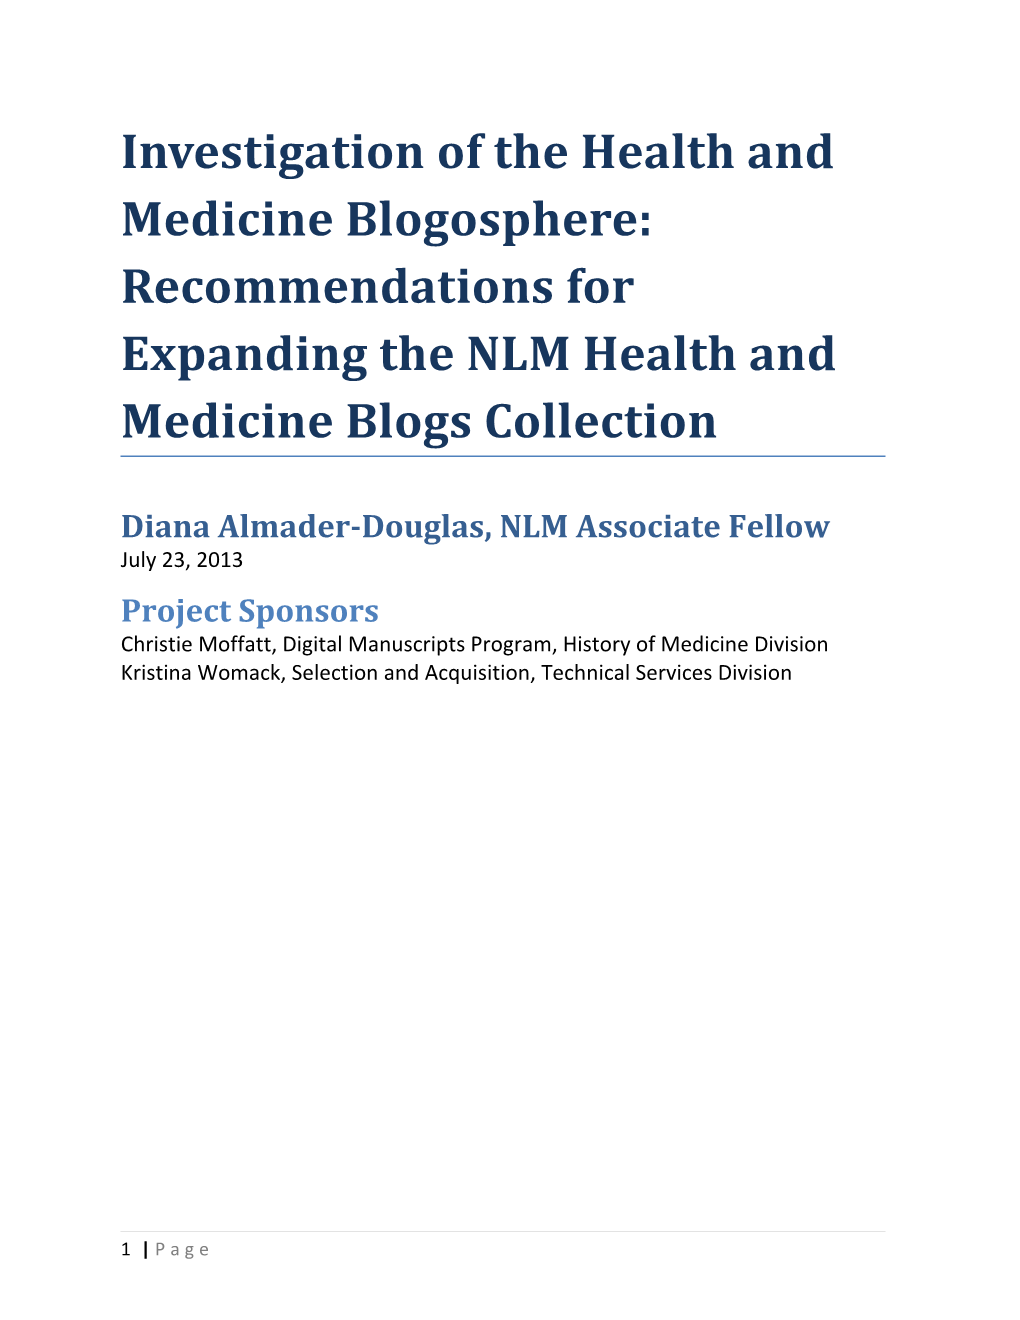 Investigation of the Health and Medicine Blogosphere: Recommendations for Expanding The